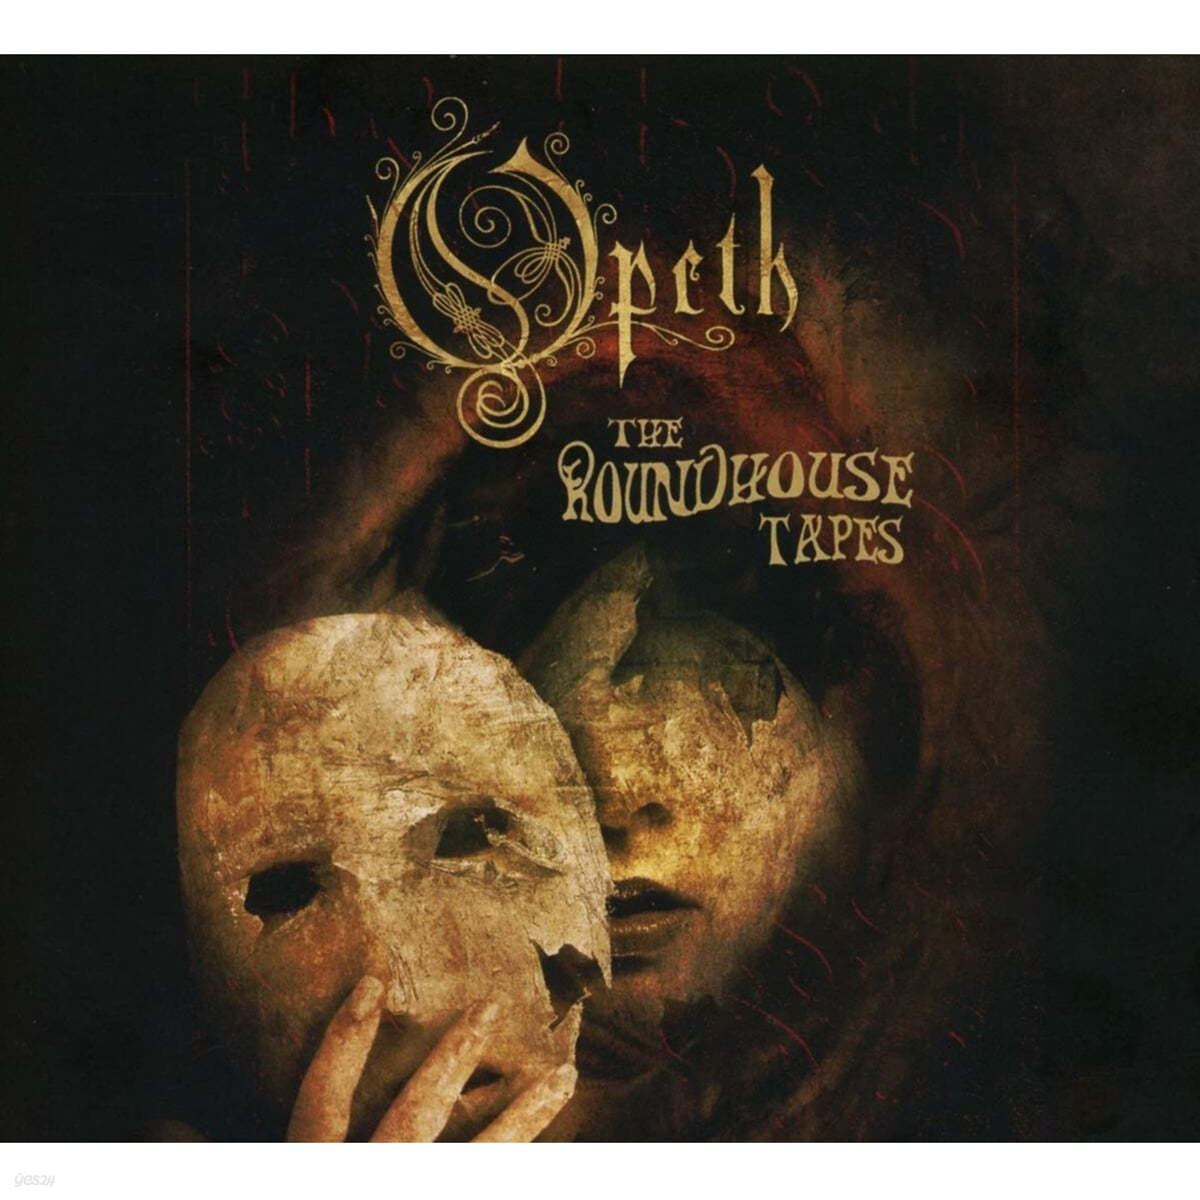 Opeth (오페스) - The Roundhouse Tapes [2CD+DVD] 